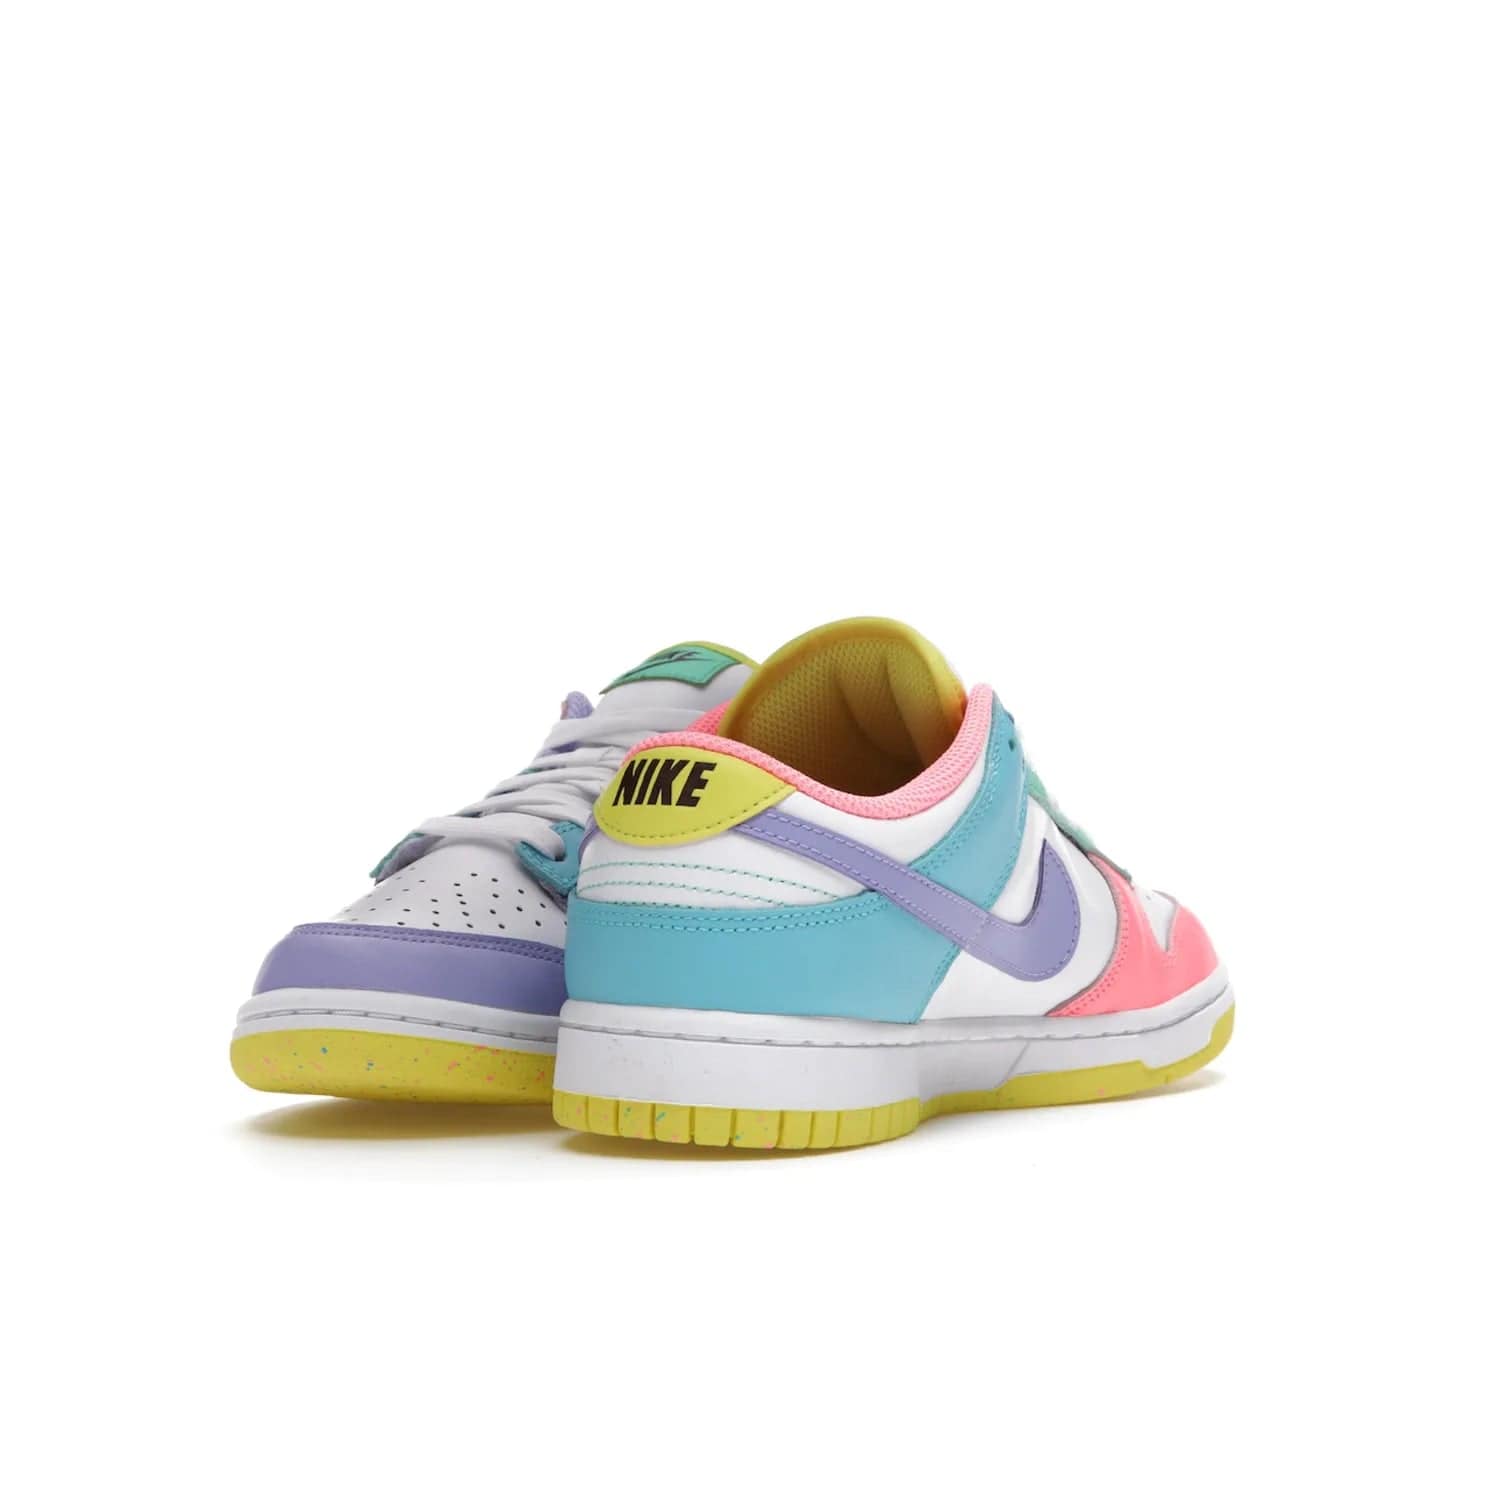 Nike Dunk Low SE Easter Candy (Women's) - Image 13 - Only at www.BallersClubKickz.com - UP
The Nike Dunk Low SE Easter Candy (Women's) brings a stylish touch to any outfit with its white leather upper, colorful accents, and multicolor speckle detailing. Shop now before they're gone.